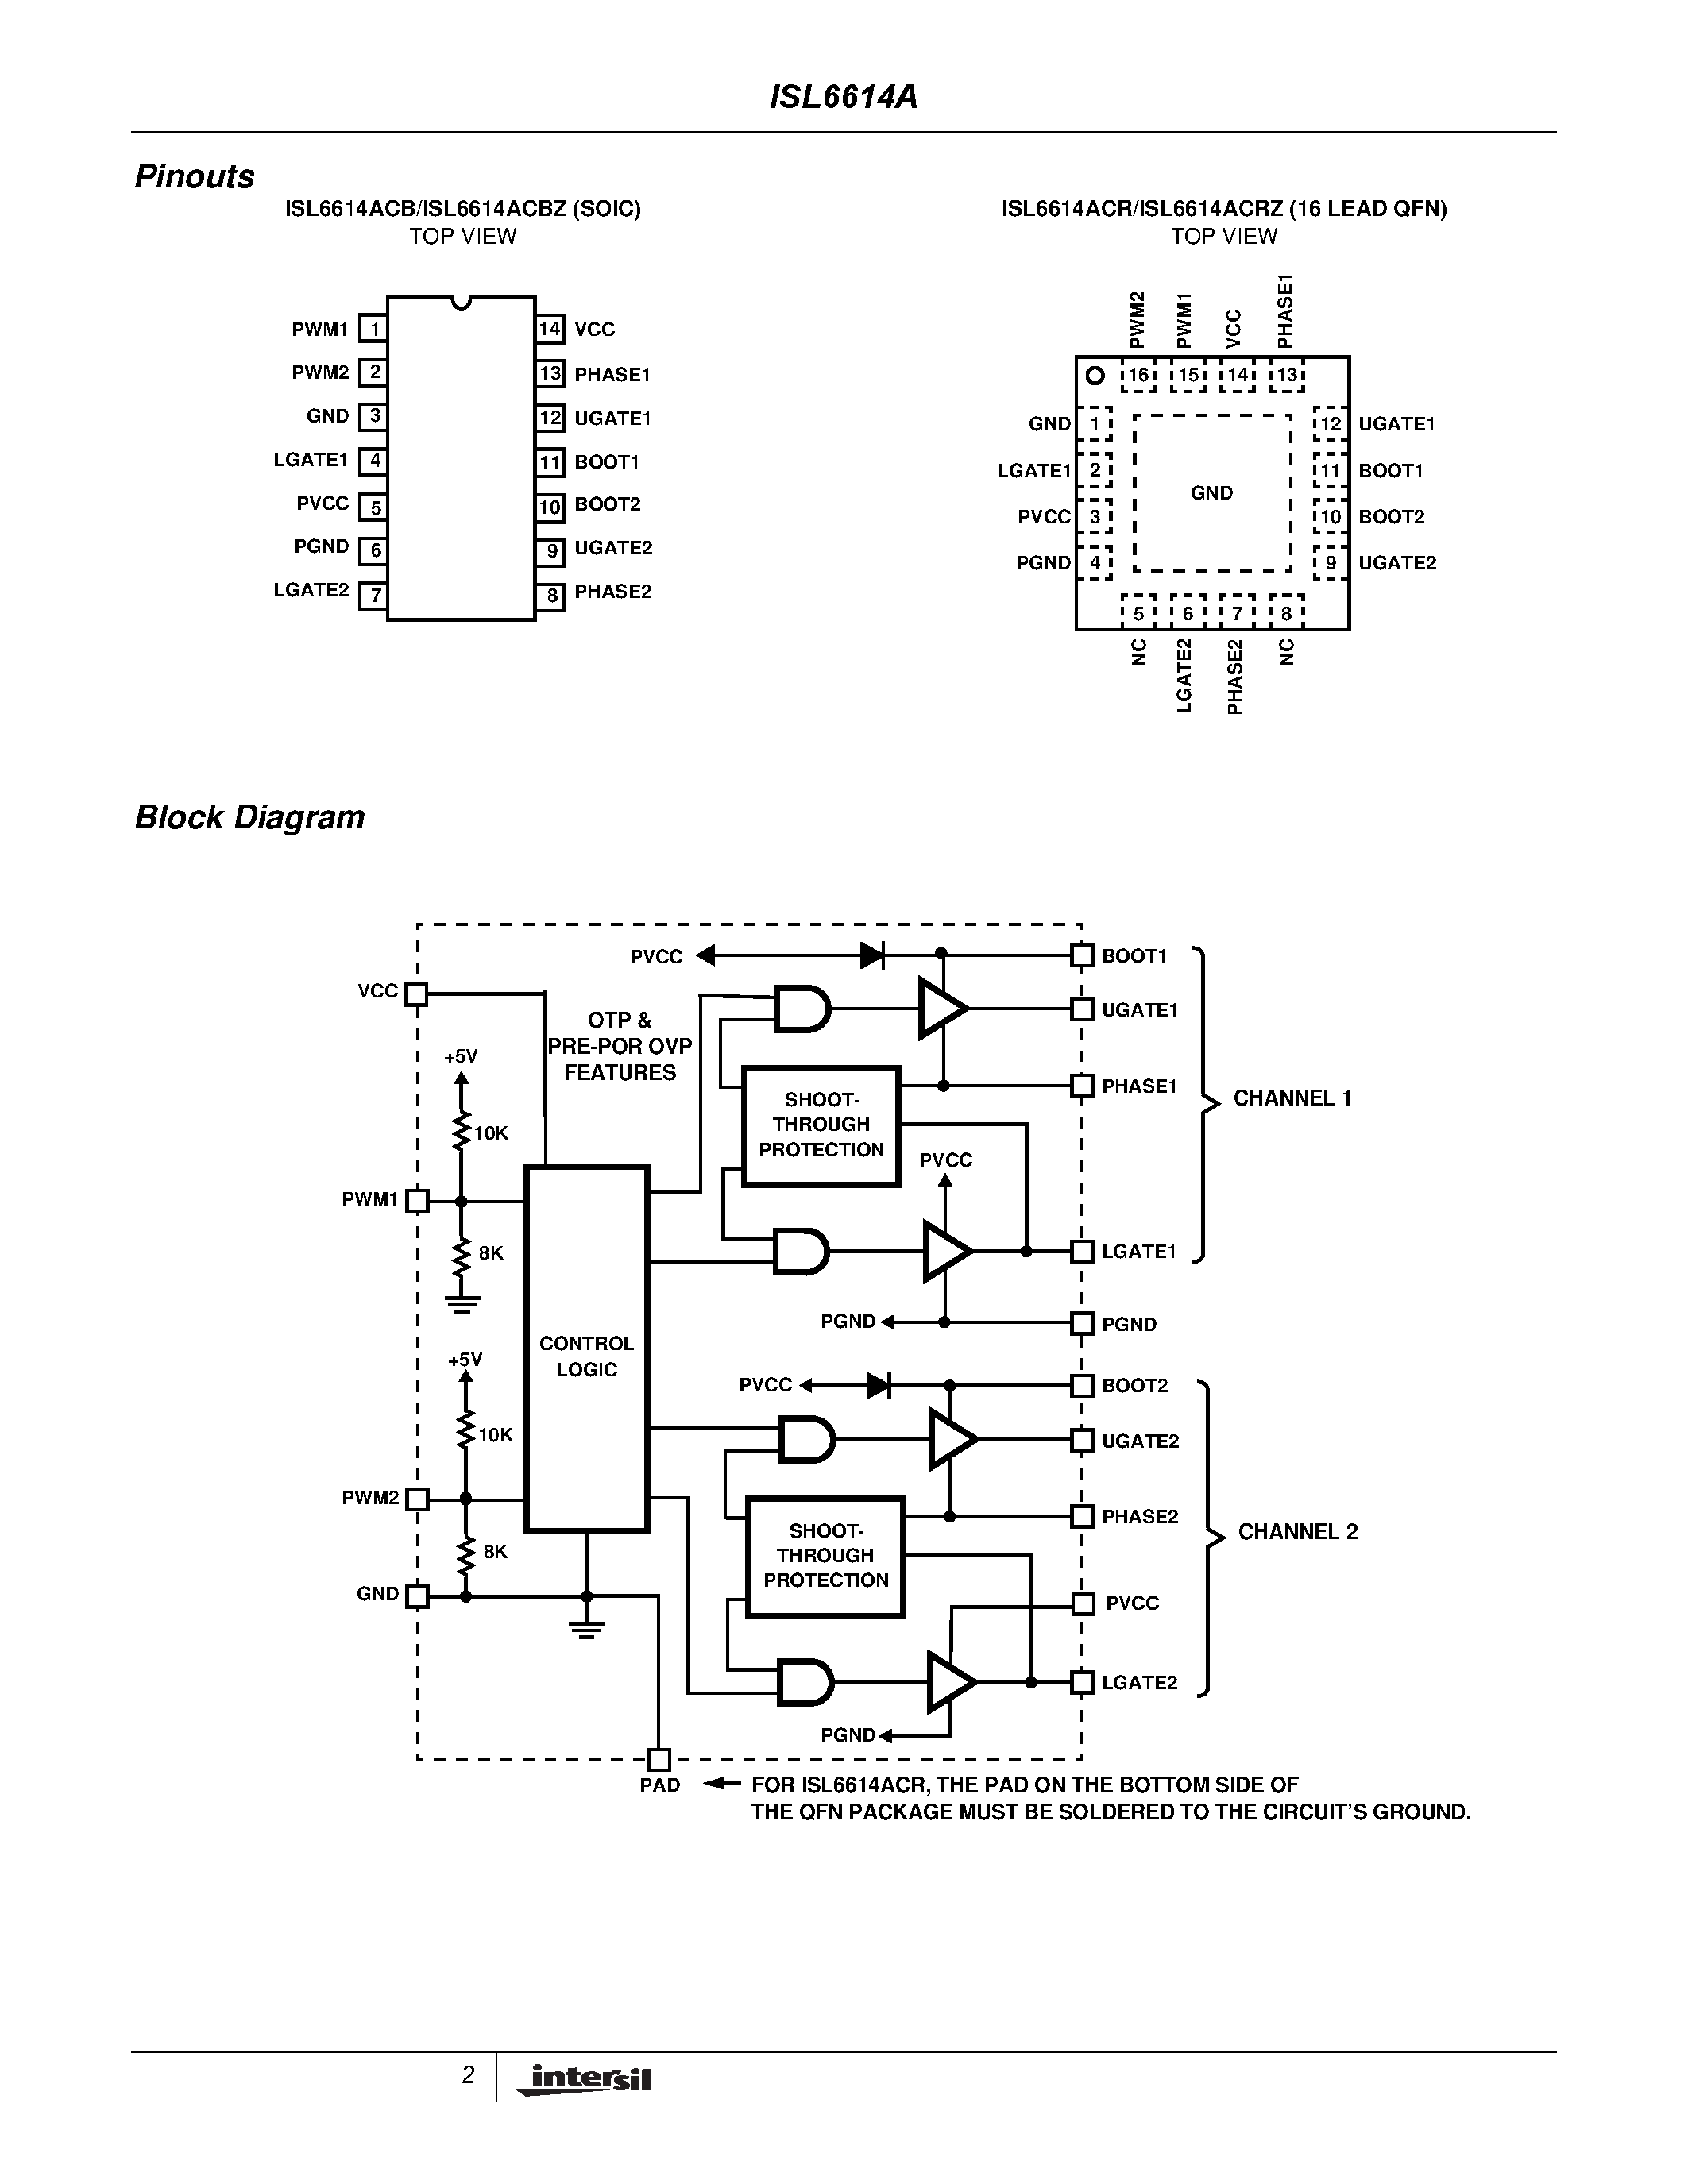 Даташит ISL6614ACR-T - Dual Advanced Synchronous Rectified Buck MOSFET Drivers with Pre-POR OVP страница 2